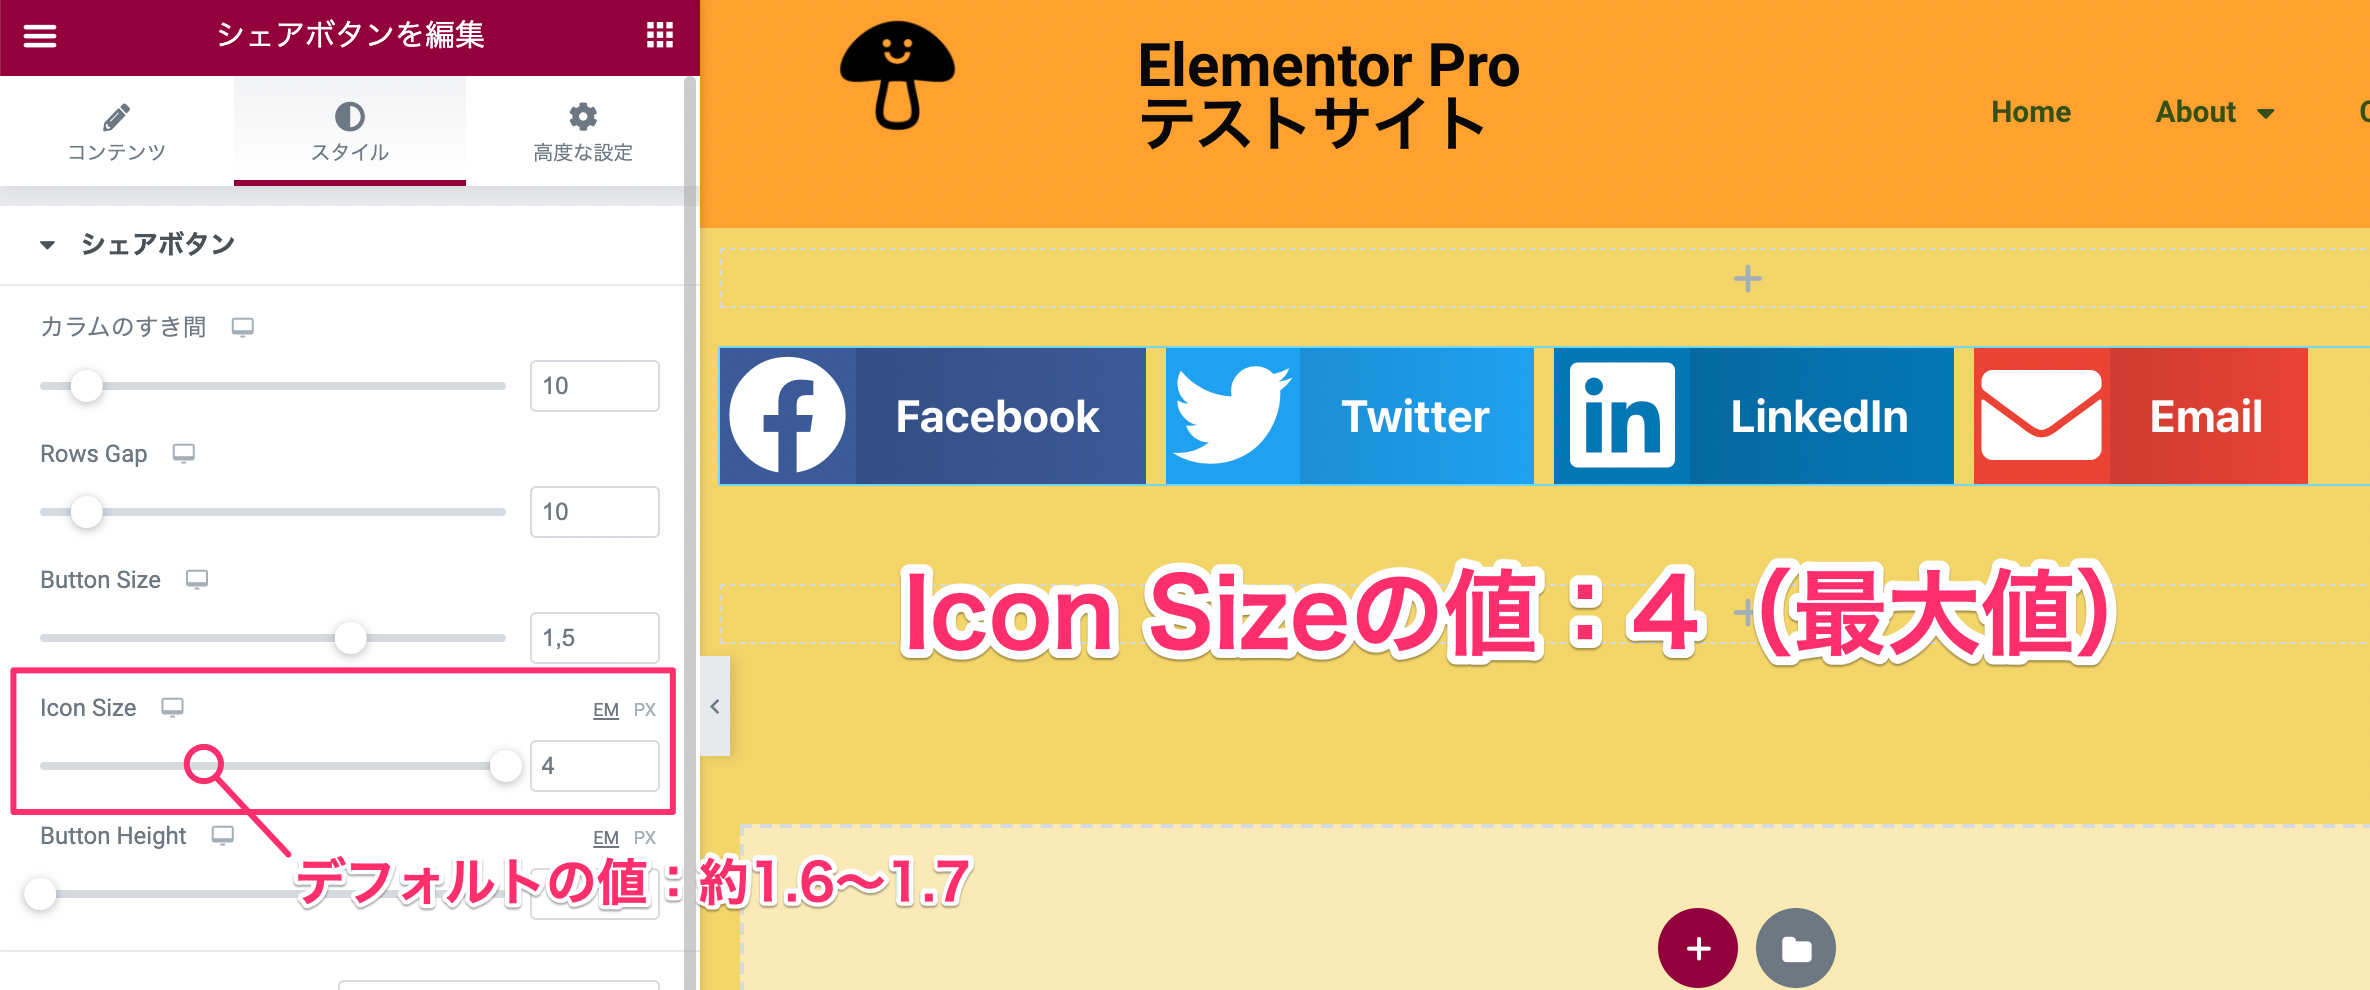 Icon Size の説明・値を4（最大値）にしたときの表示画面